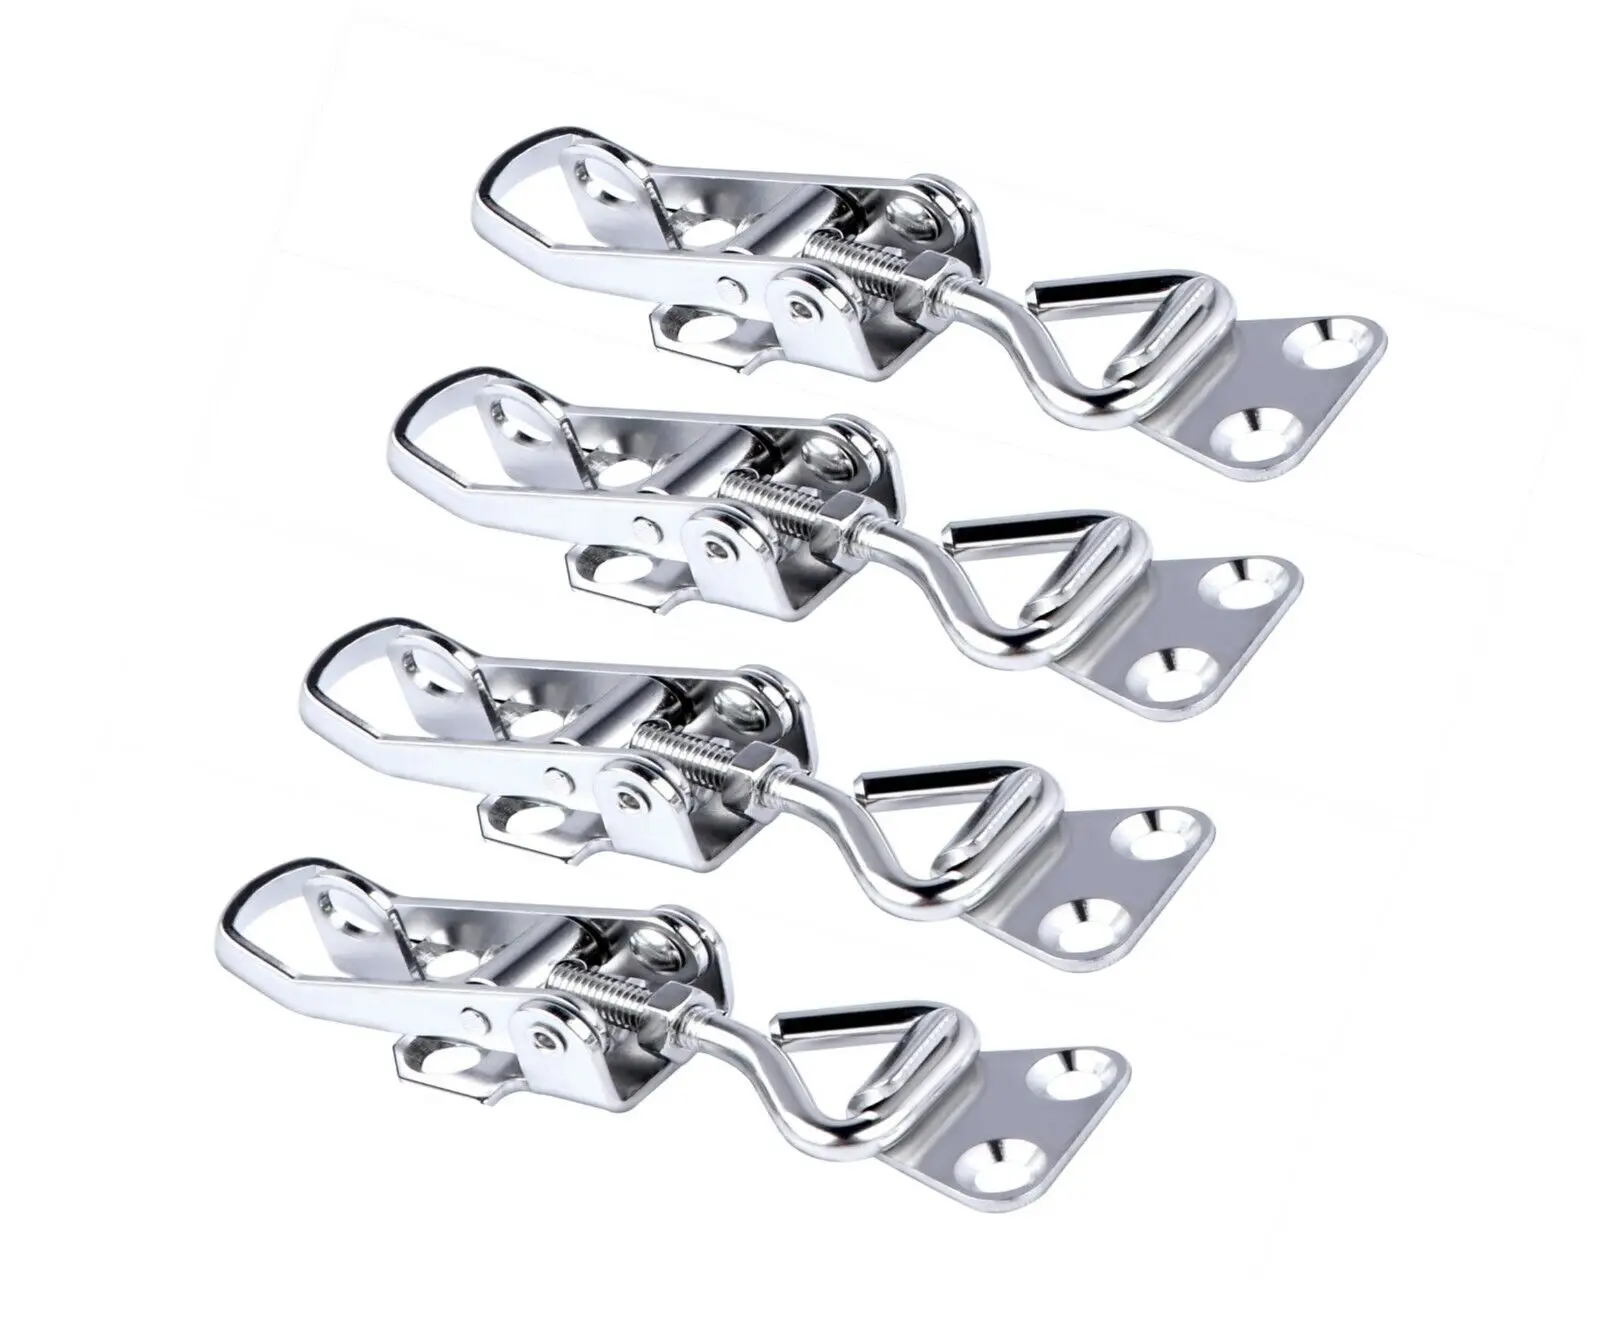 Boat Accessories 4 Pieces Cabinet Boxes Lever Handle Toggle Catch Latch Lock Clamp Hasp 26.5X75 mm люстра потолочная стивен e27 5x75 вт